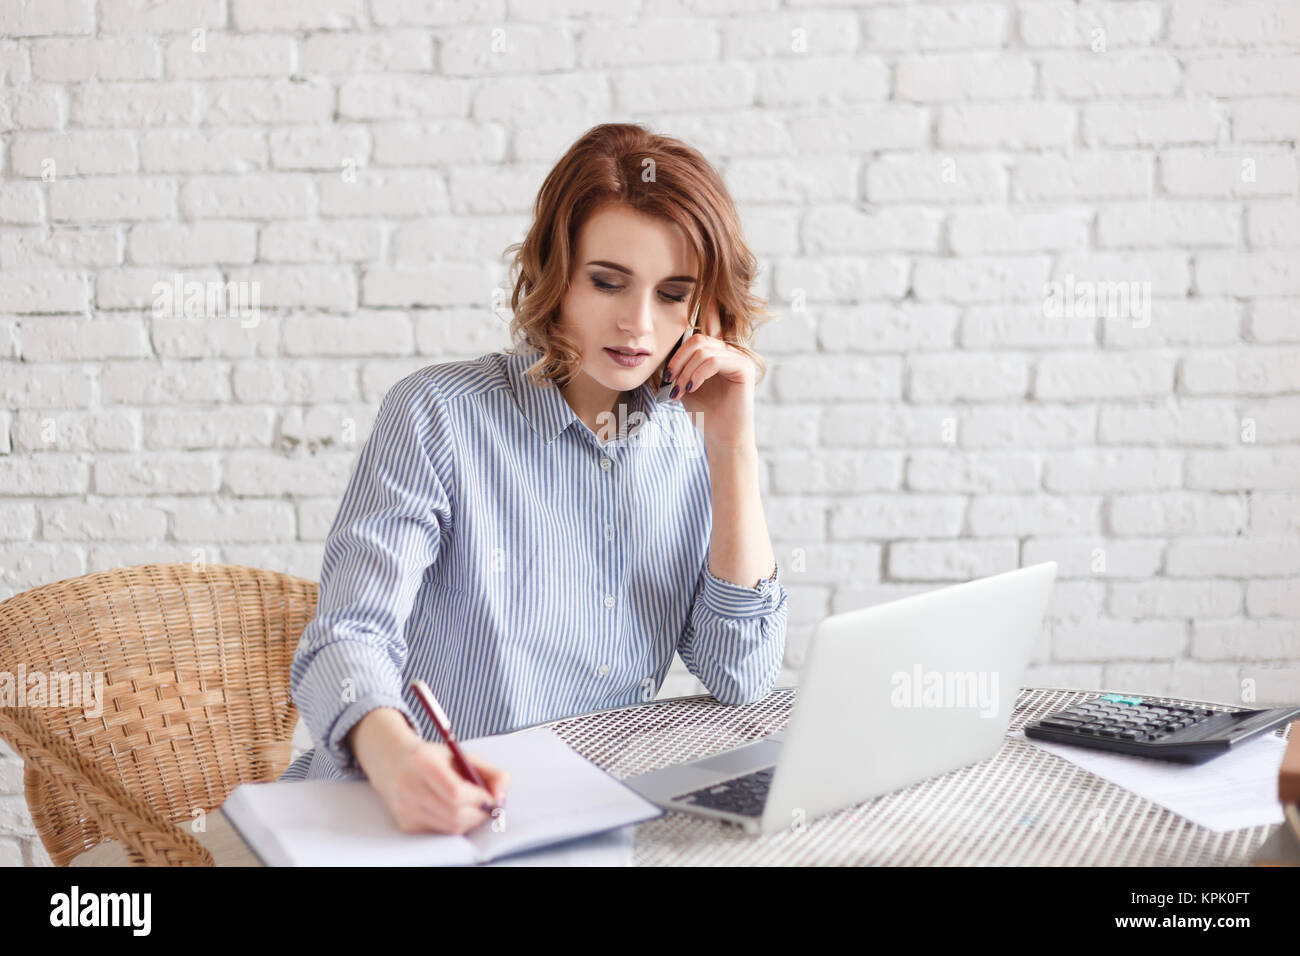 Business woman working in office with documents Stock Photo